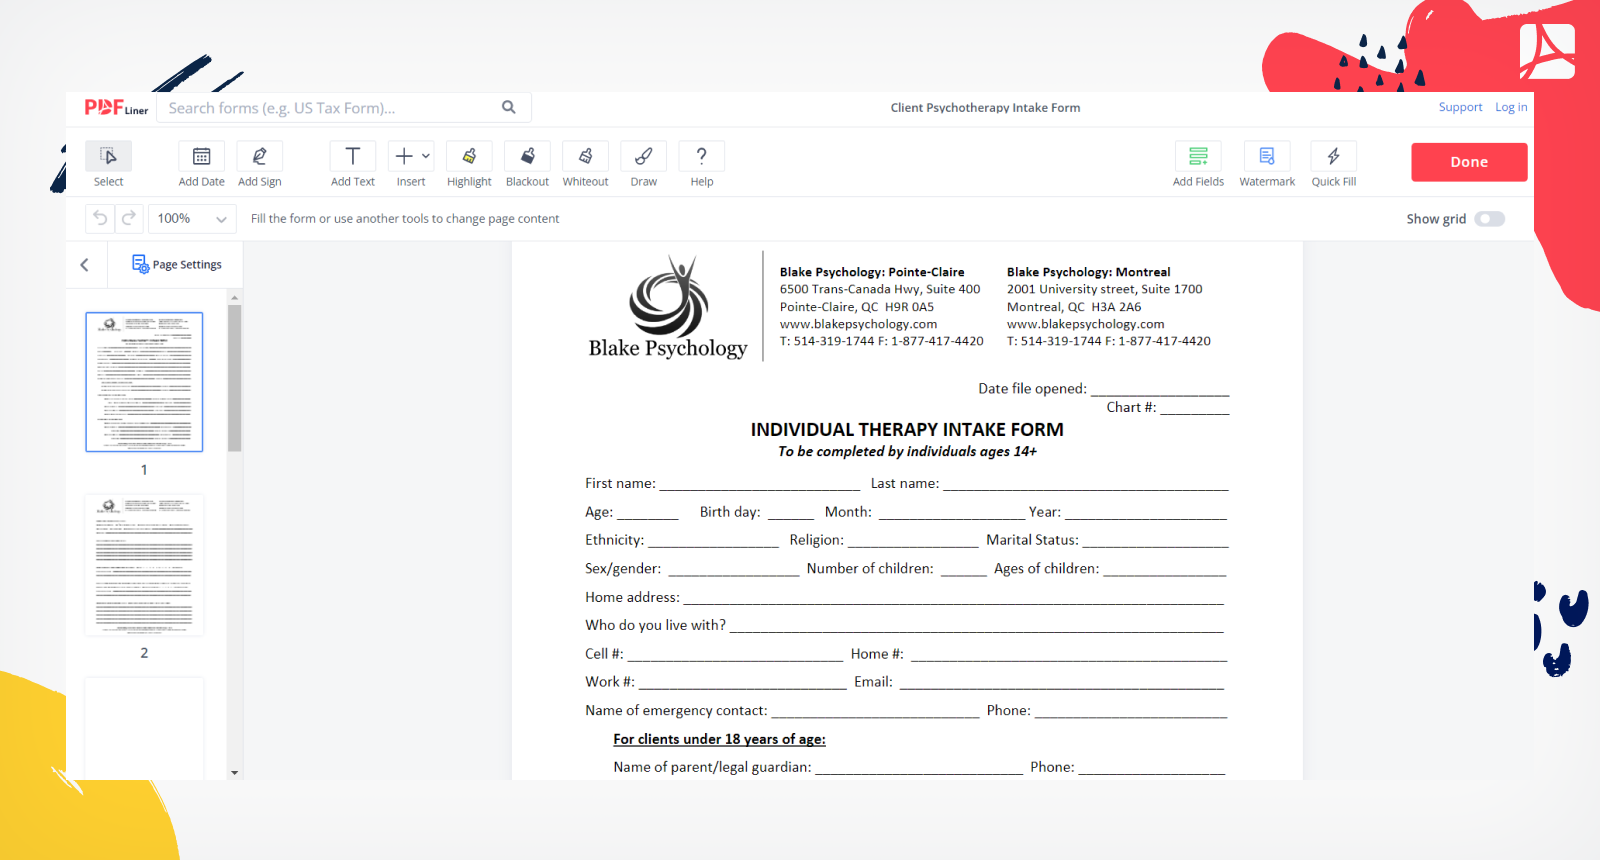 Client Psychotherapy Intake Form Screenshot